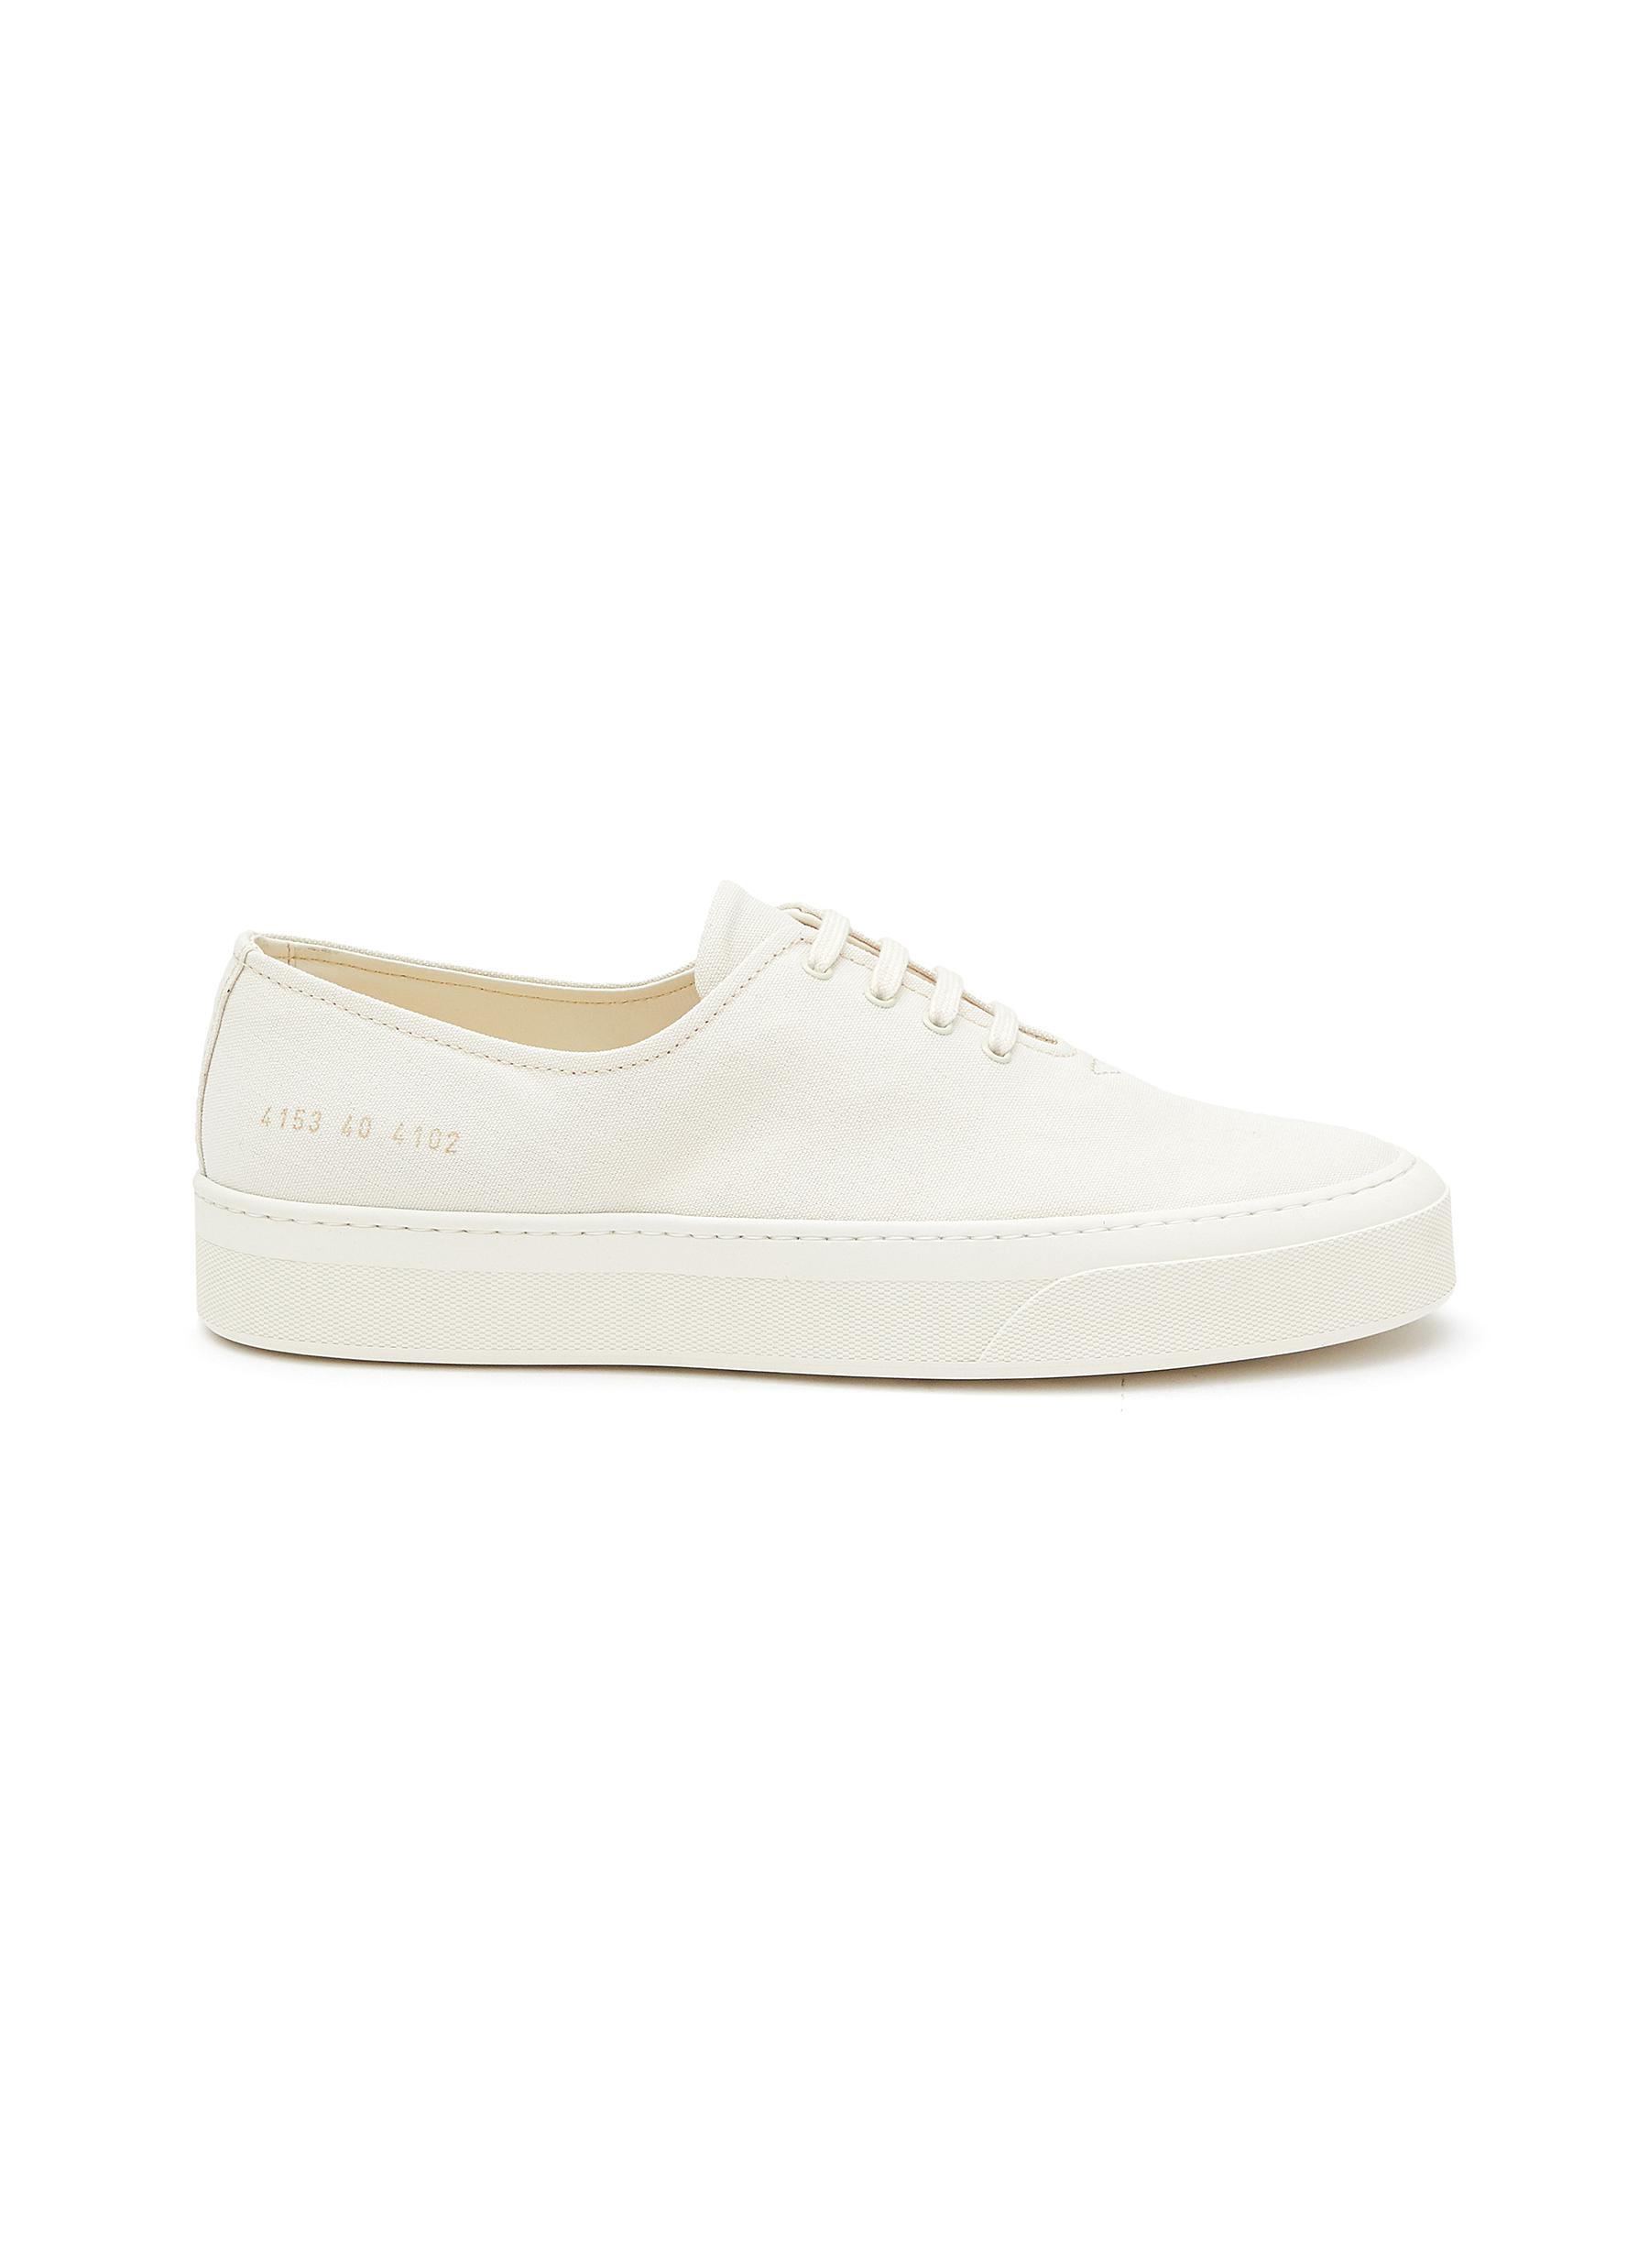 COMMON PROJECTS ‘FOUR HOLE' LOW TOP CANVAS SNEAKERS